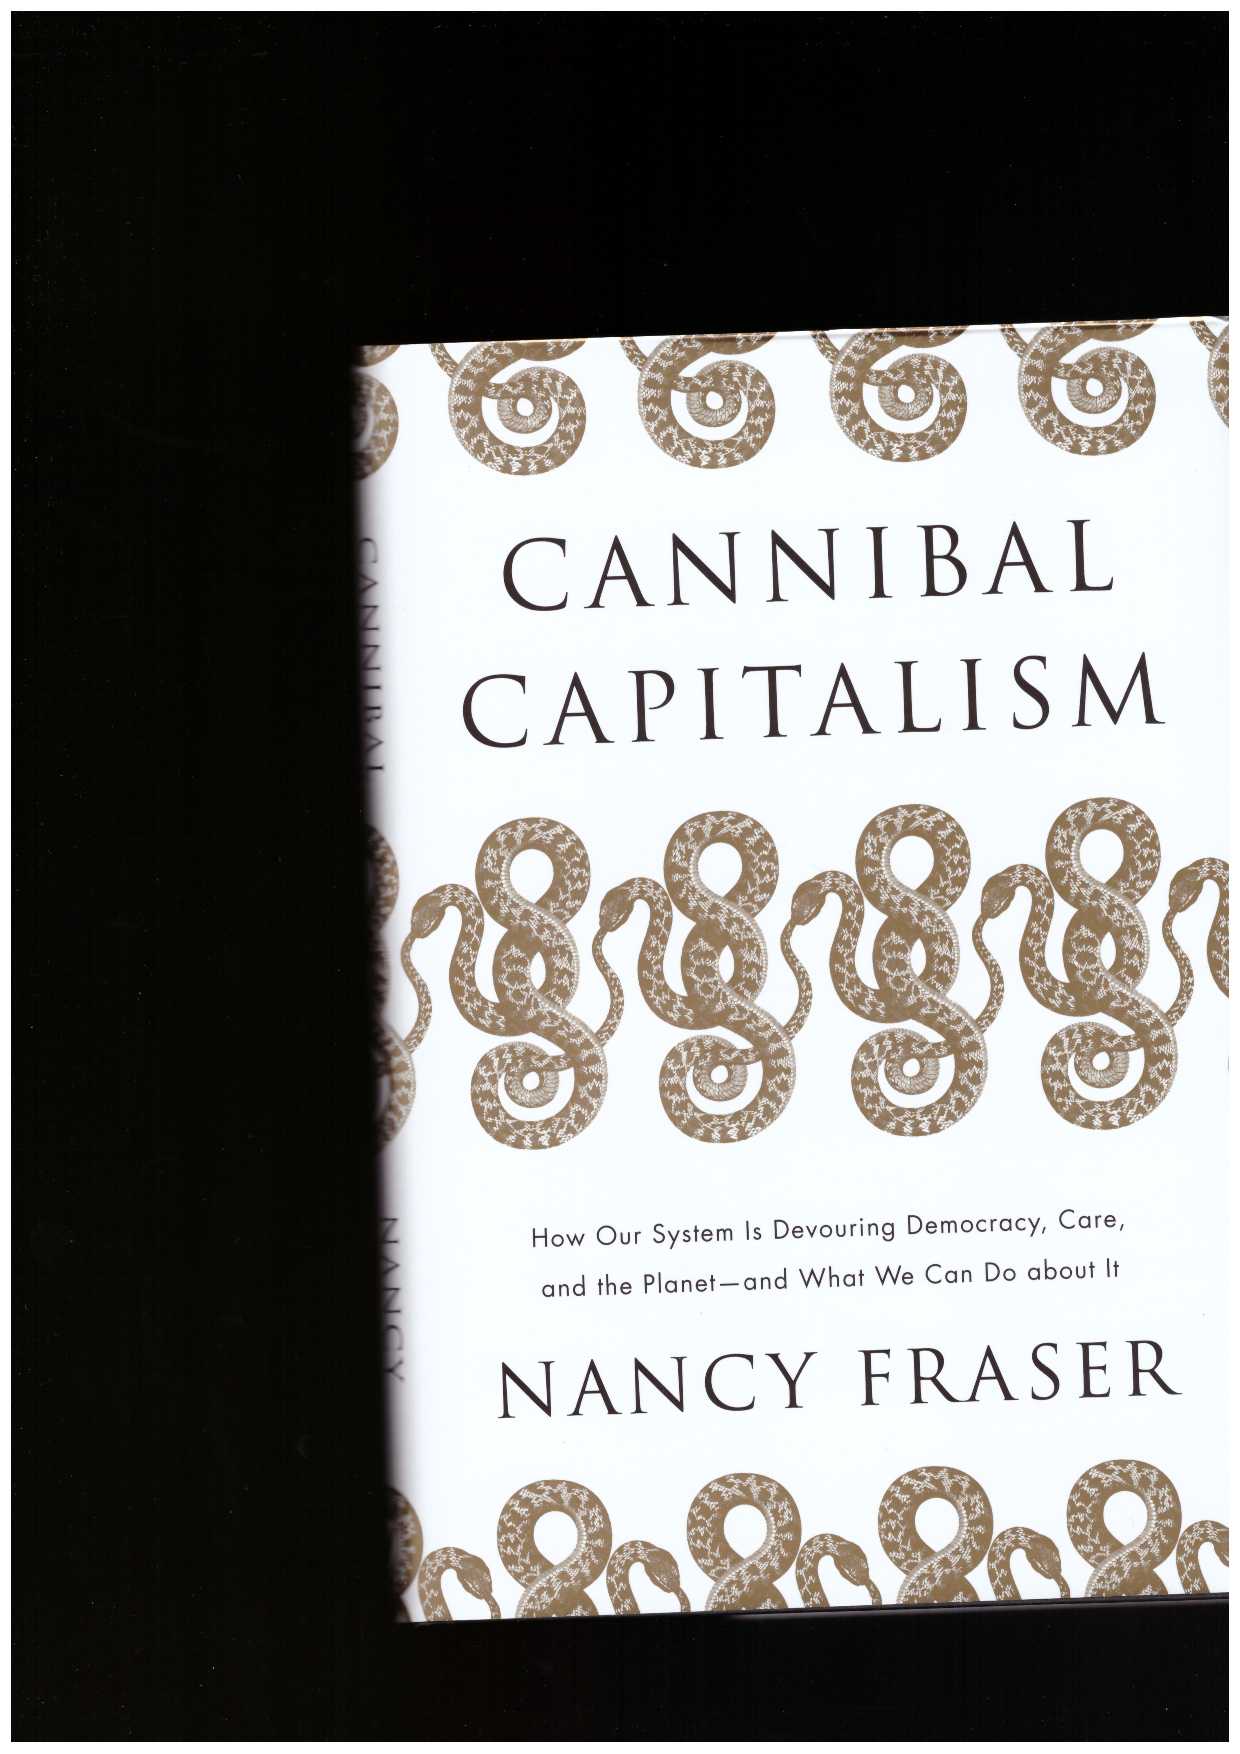 FRASER, Nancy - Cannibal Capitalism. How Our System Is Devouring Democracy, Care, and the Planet—and What We Can Do About It